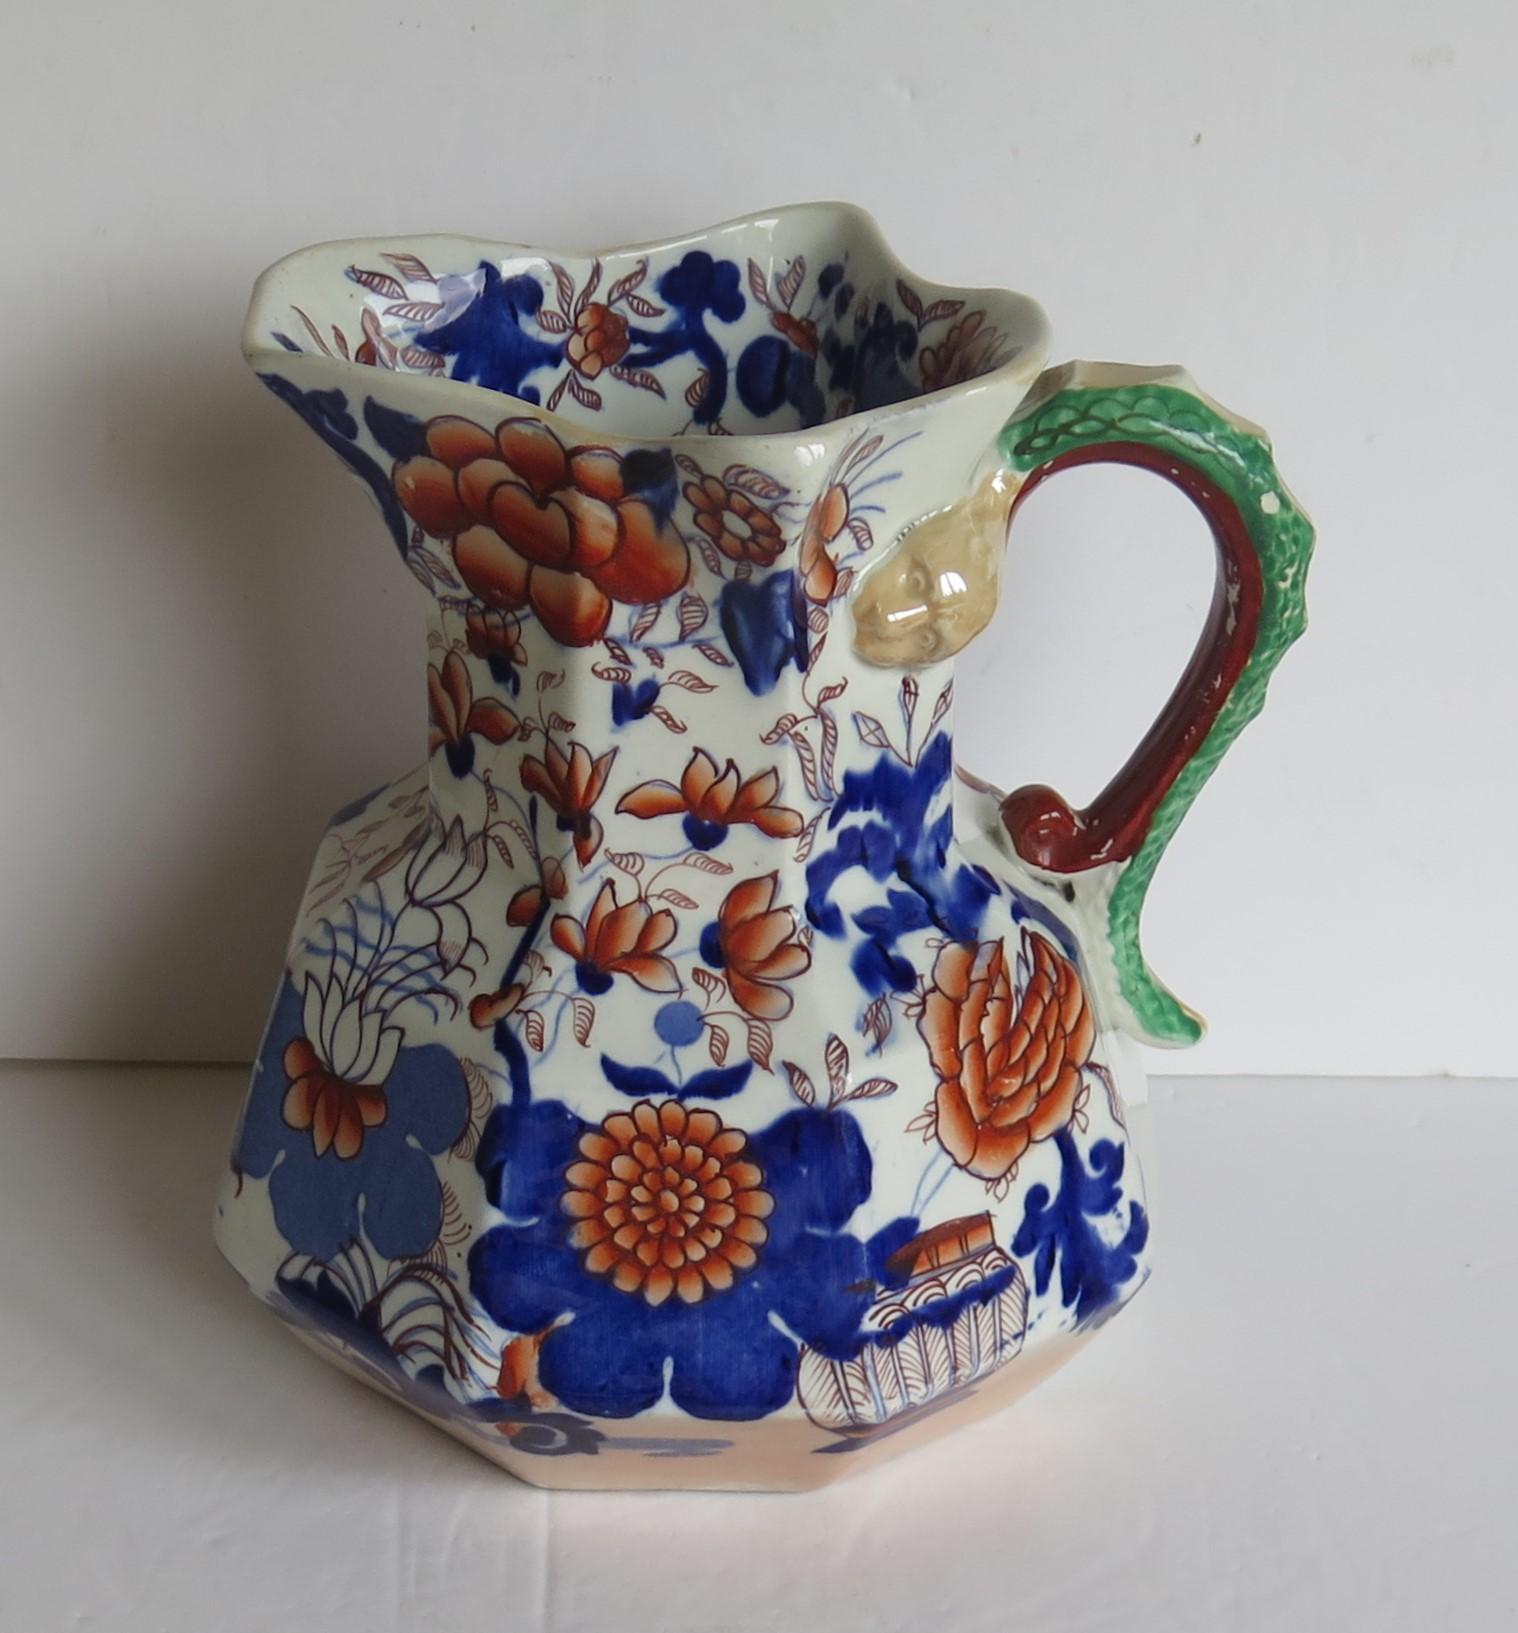 This is a good, early Mason's Ironstone large Hydra jug or pitcher in the Basket Japan pattern, made in the English, late Georgian period, circa 1815-1820.

This jug is particularly decorative, being a much larger size than we normally see and